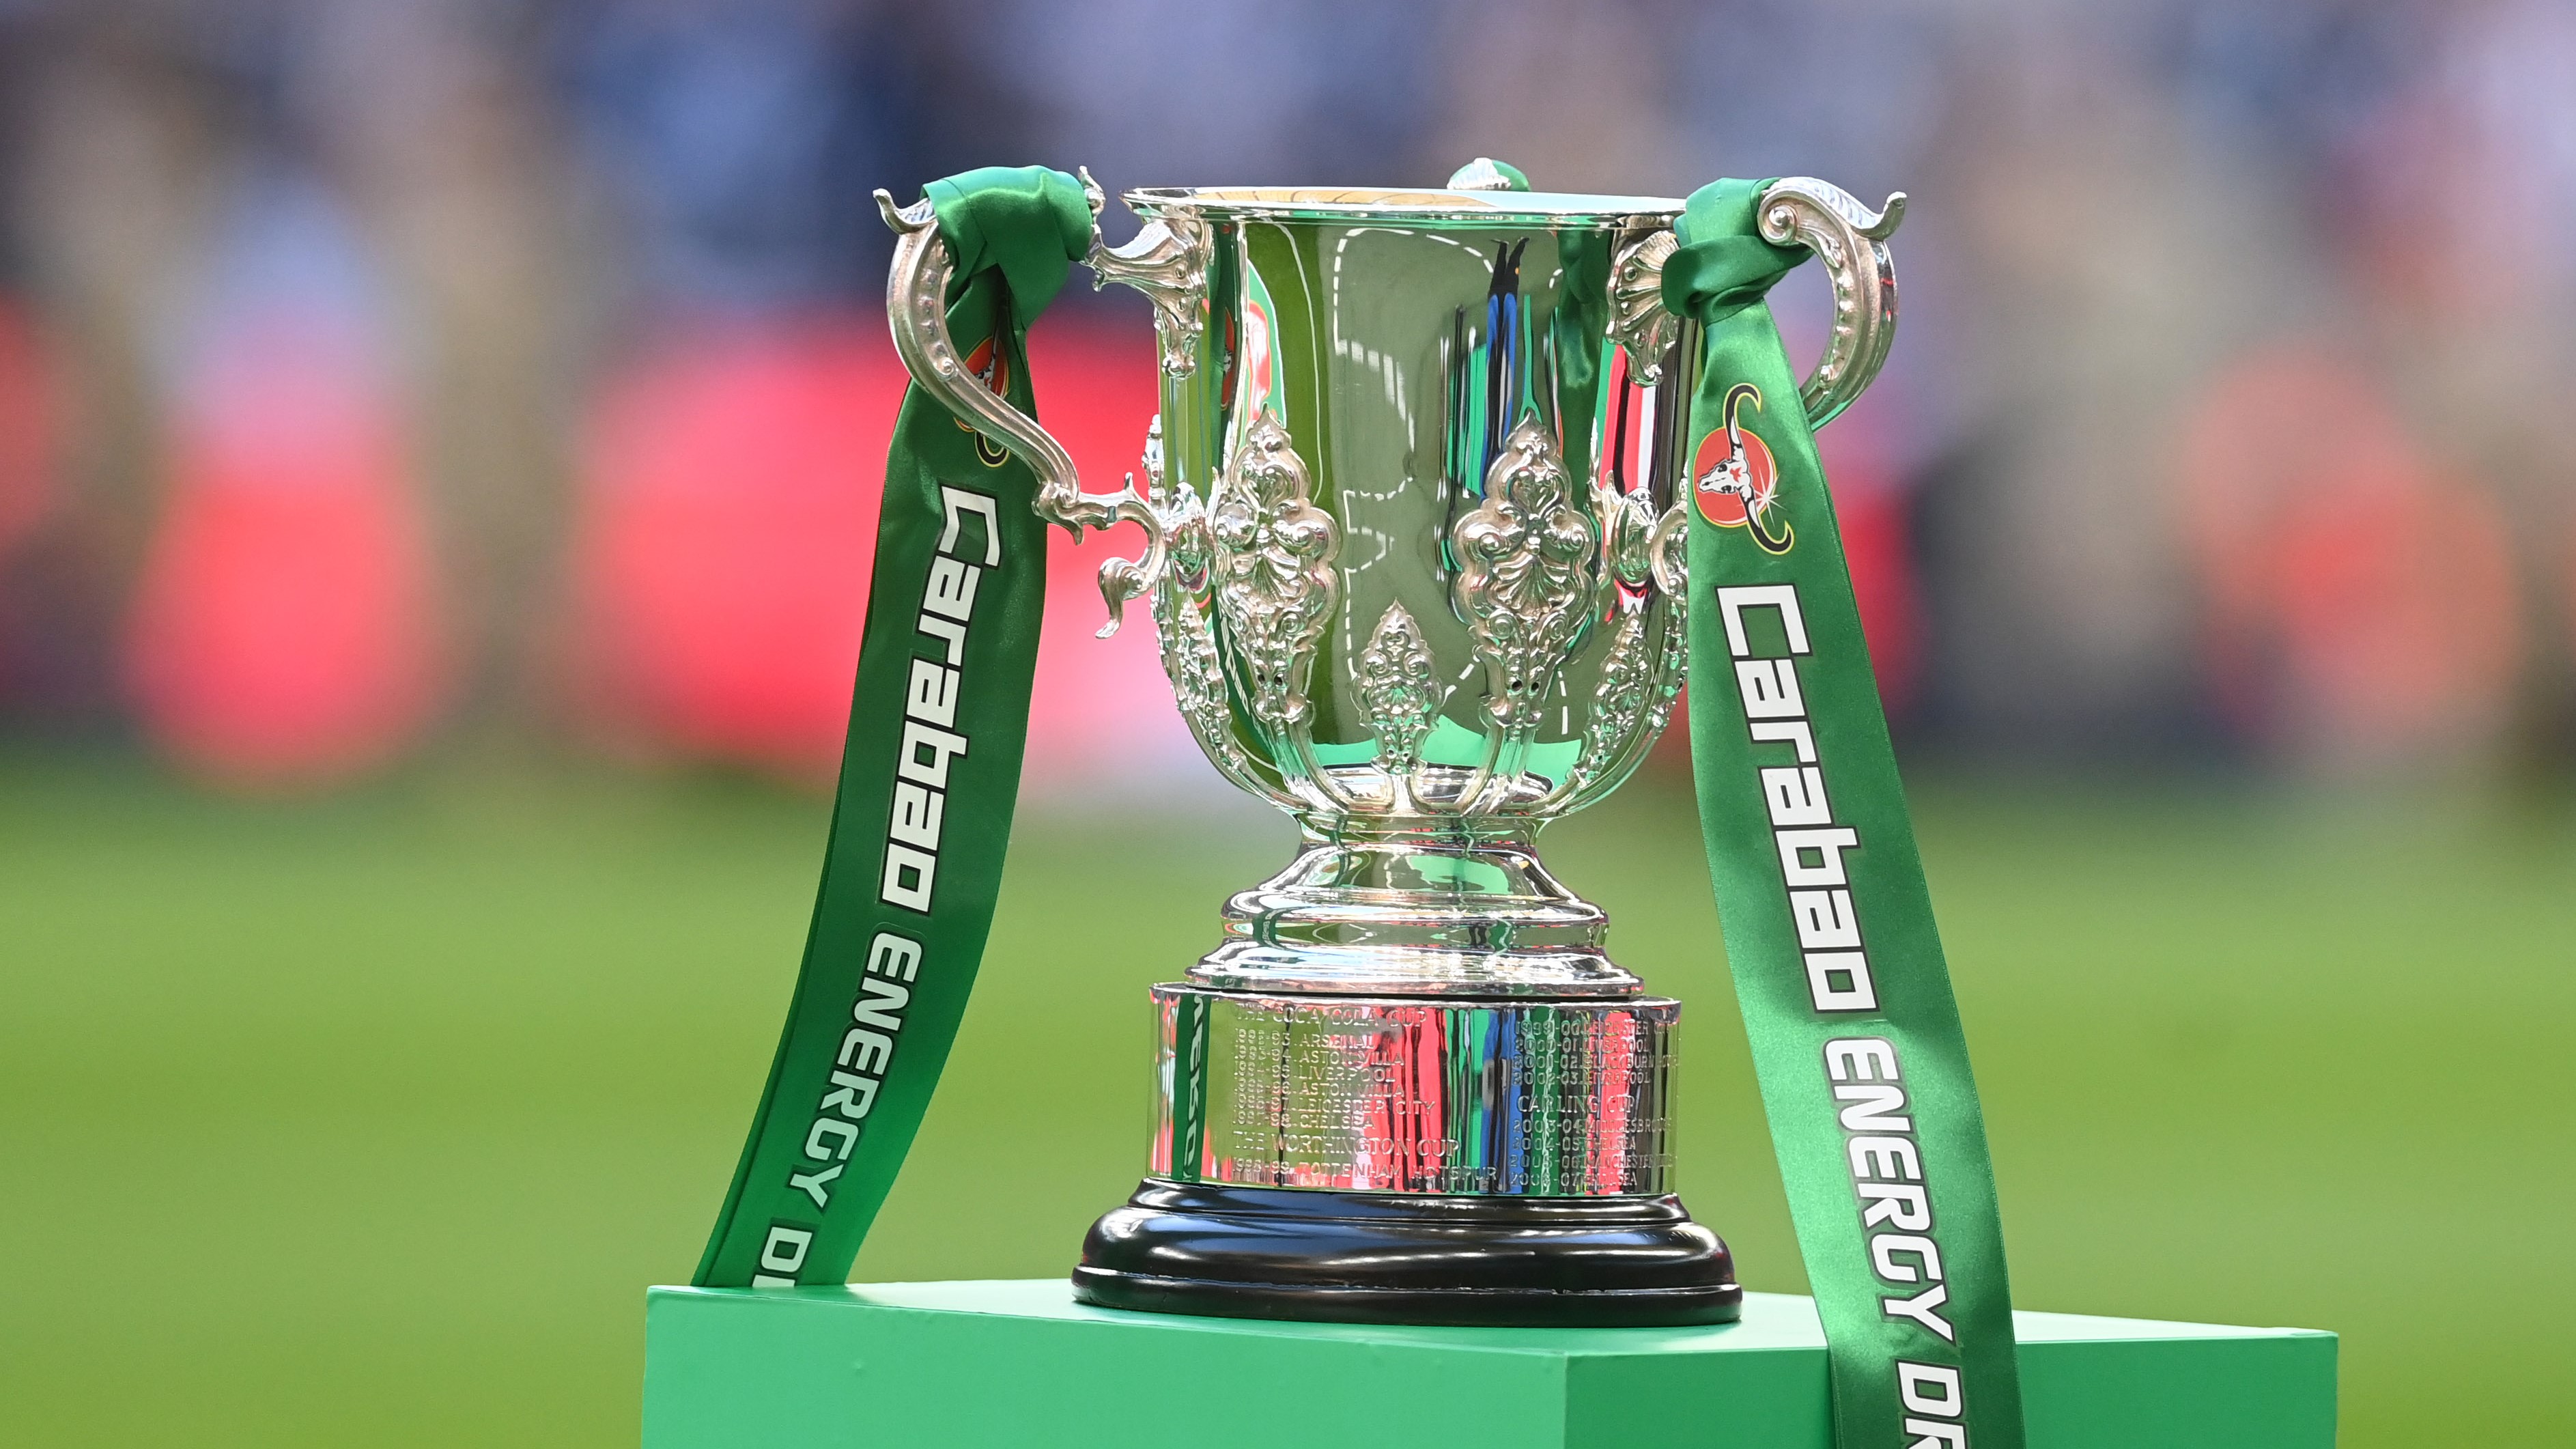 Swansea City will face Bournemouth at home in the Carabao Cup second ...